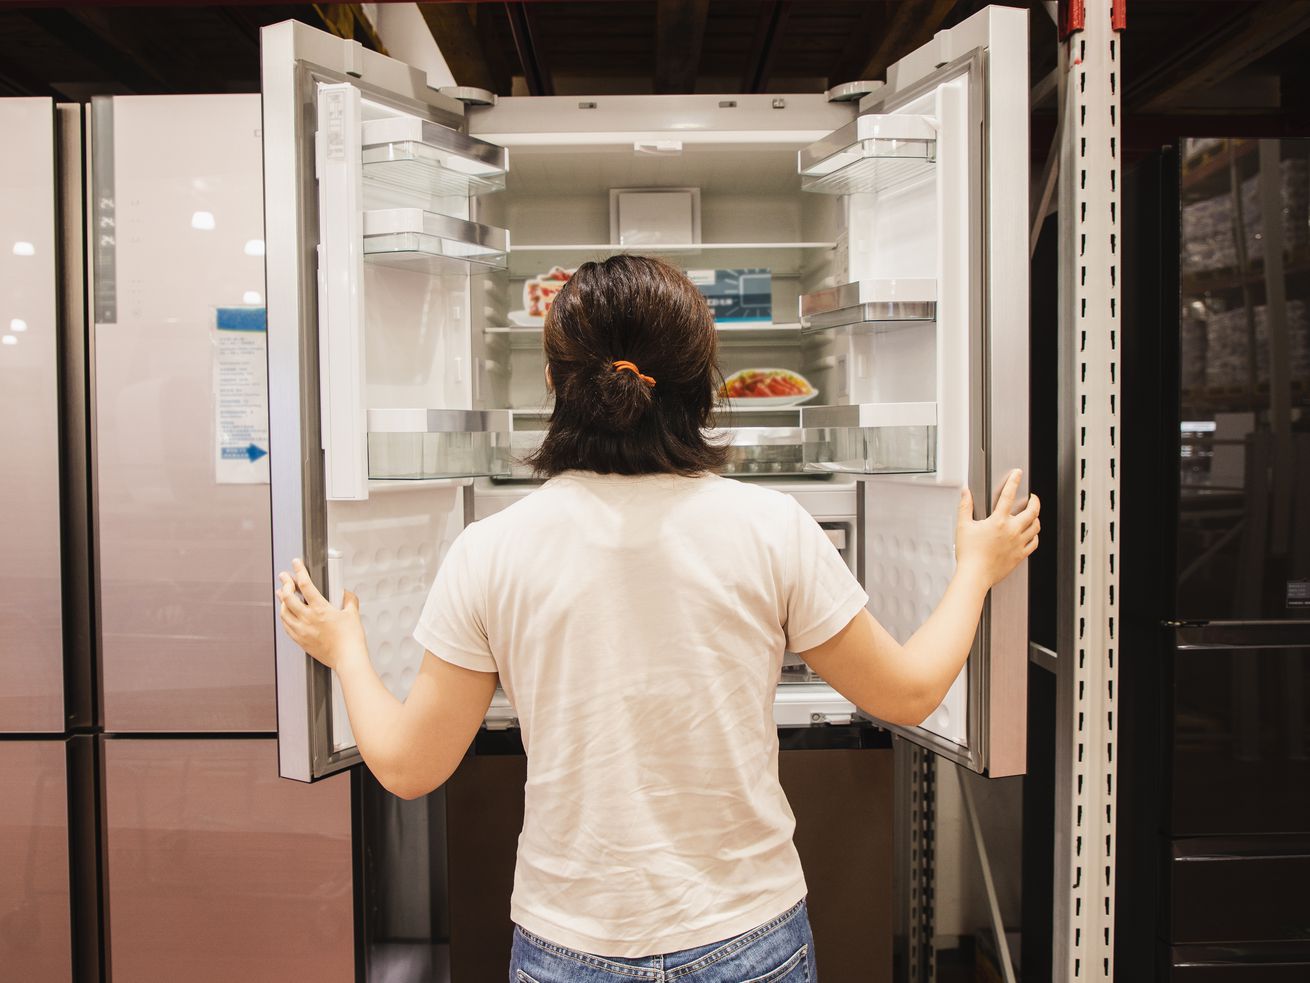 The problem of global energy inequity, explained by American refrigerators